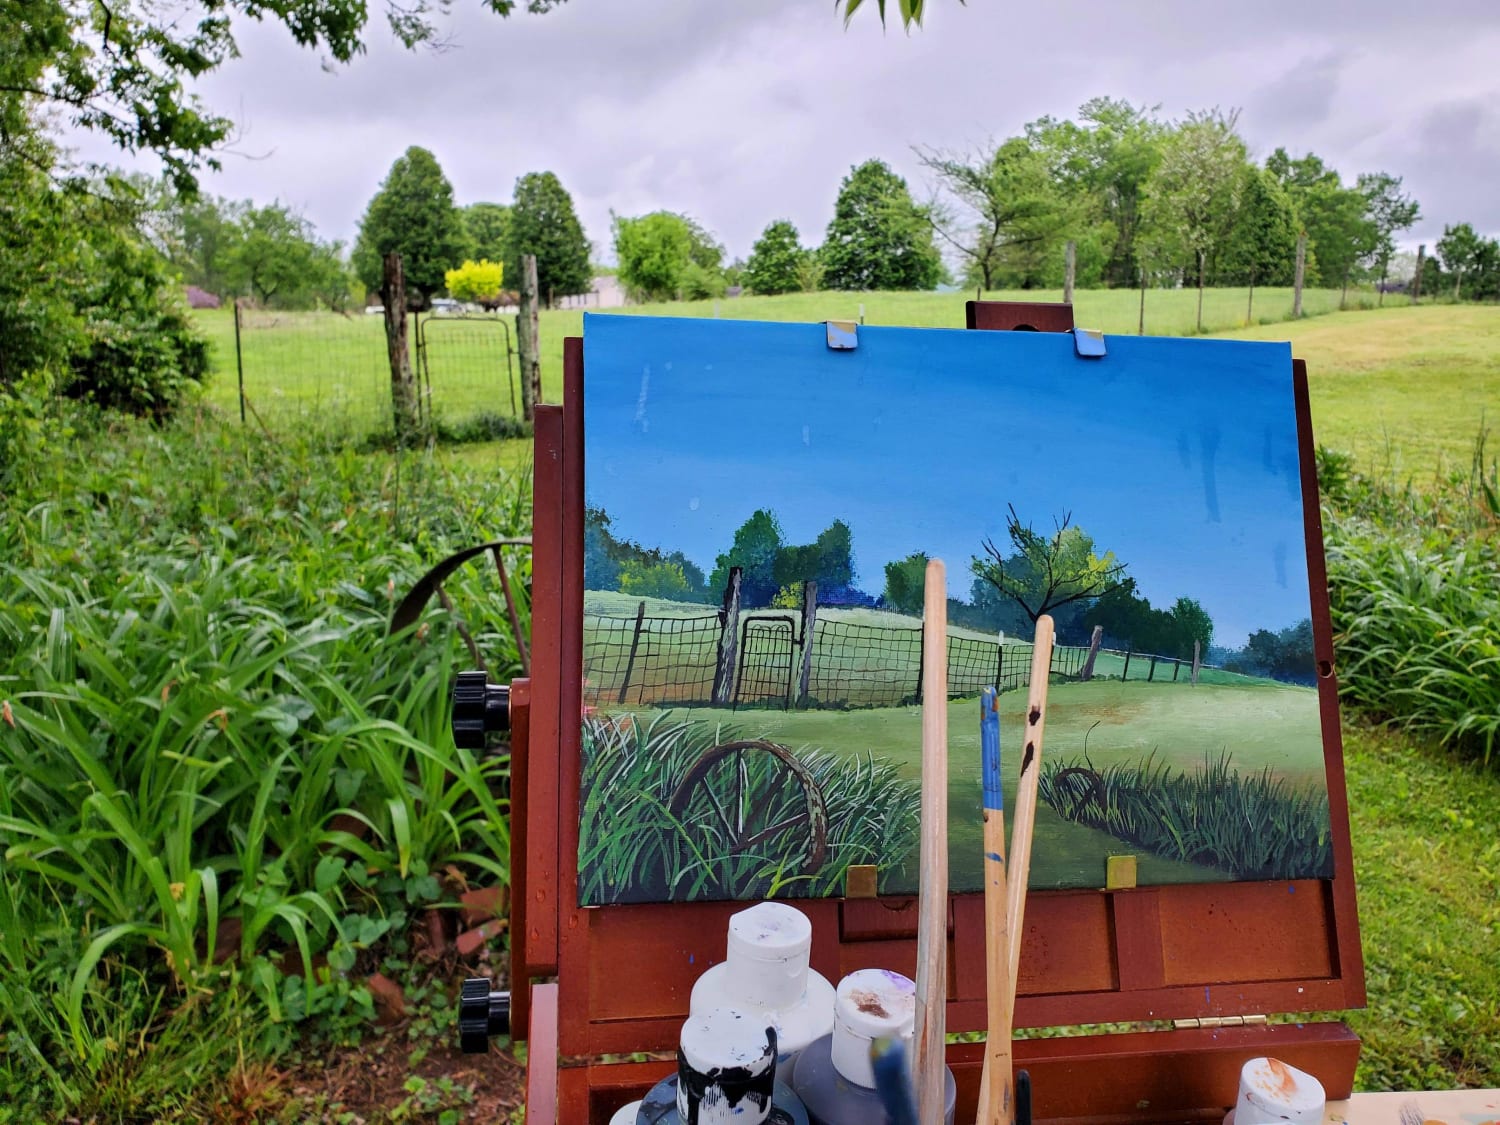 I'm not as good as some of you, but I did some plein-air work today and I had a blast!